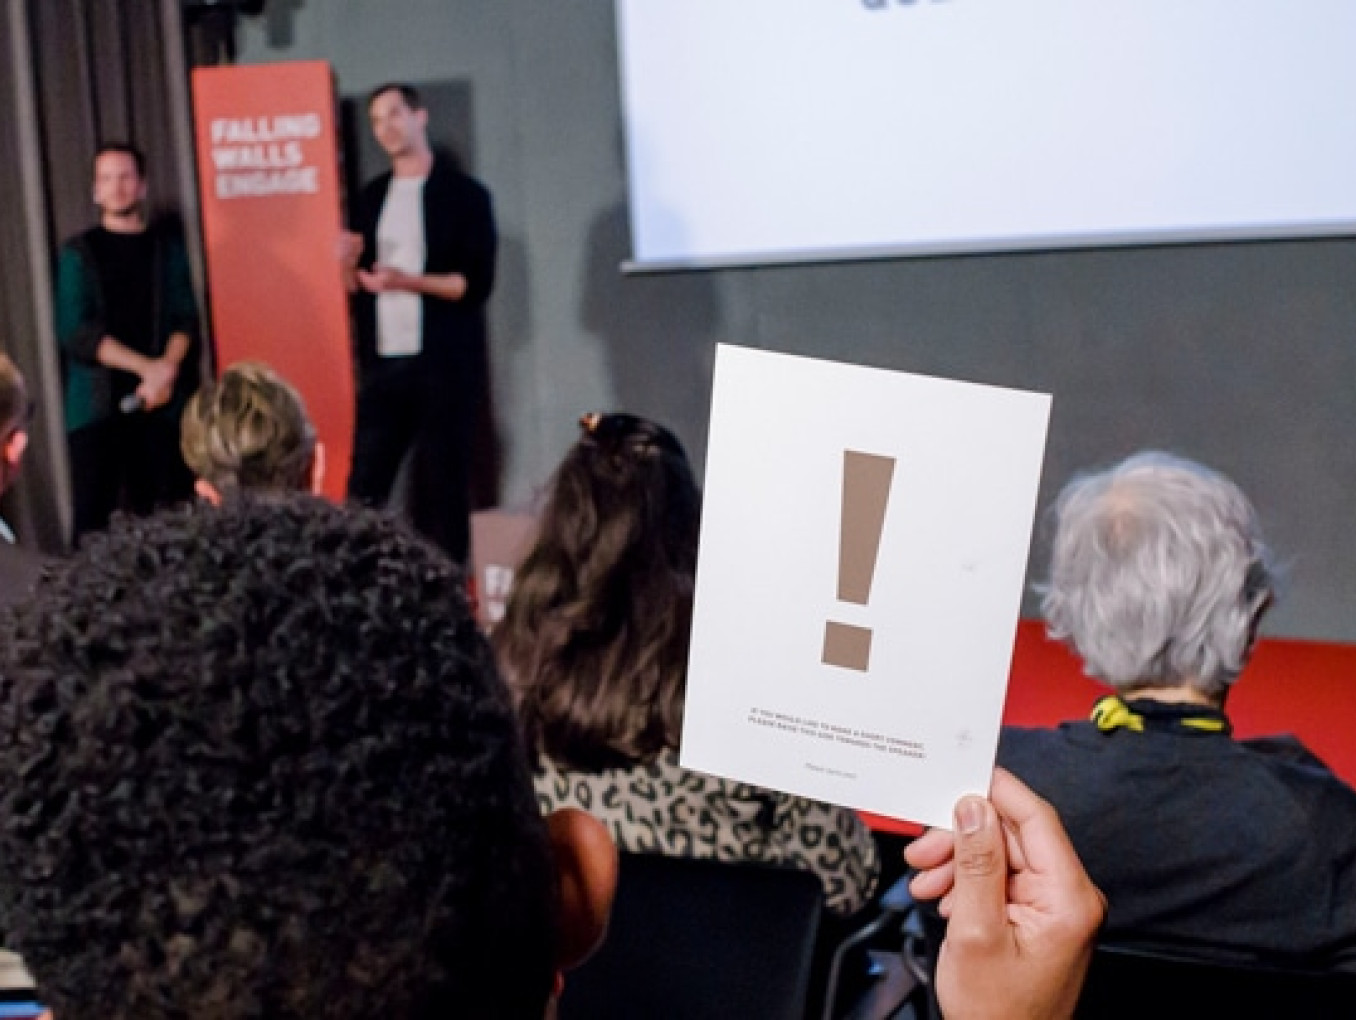 Audience at Falling Walls Engage Pitches at Science Summit 2023